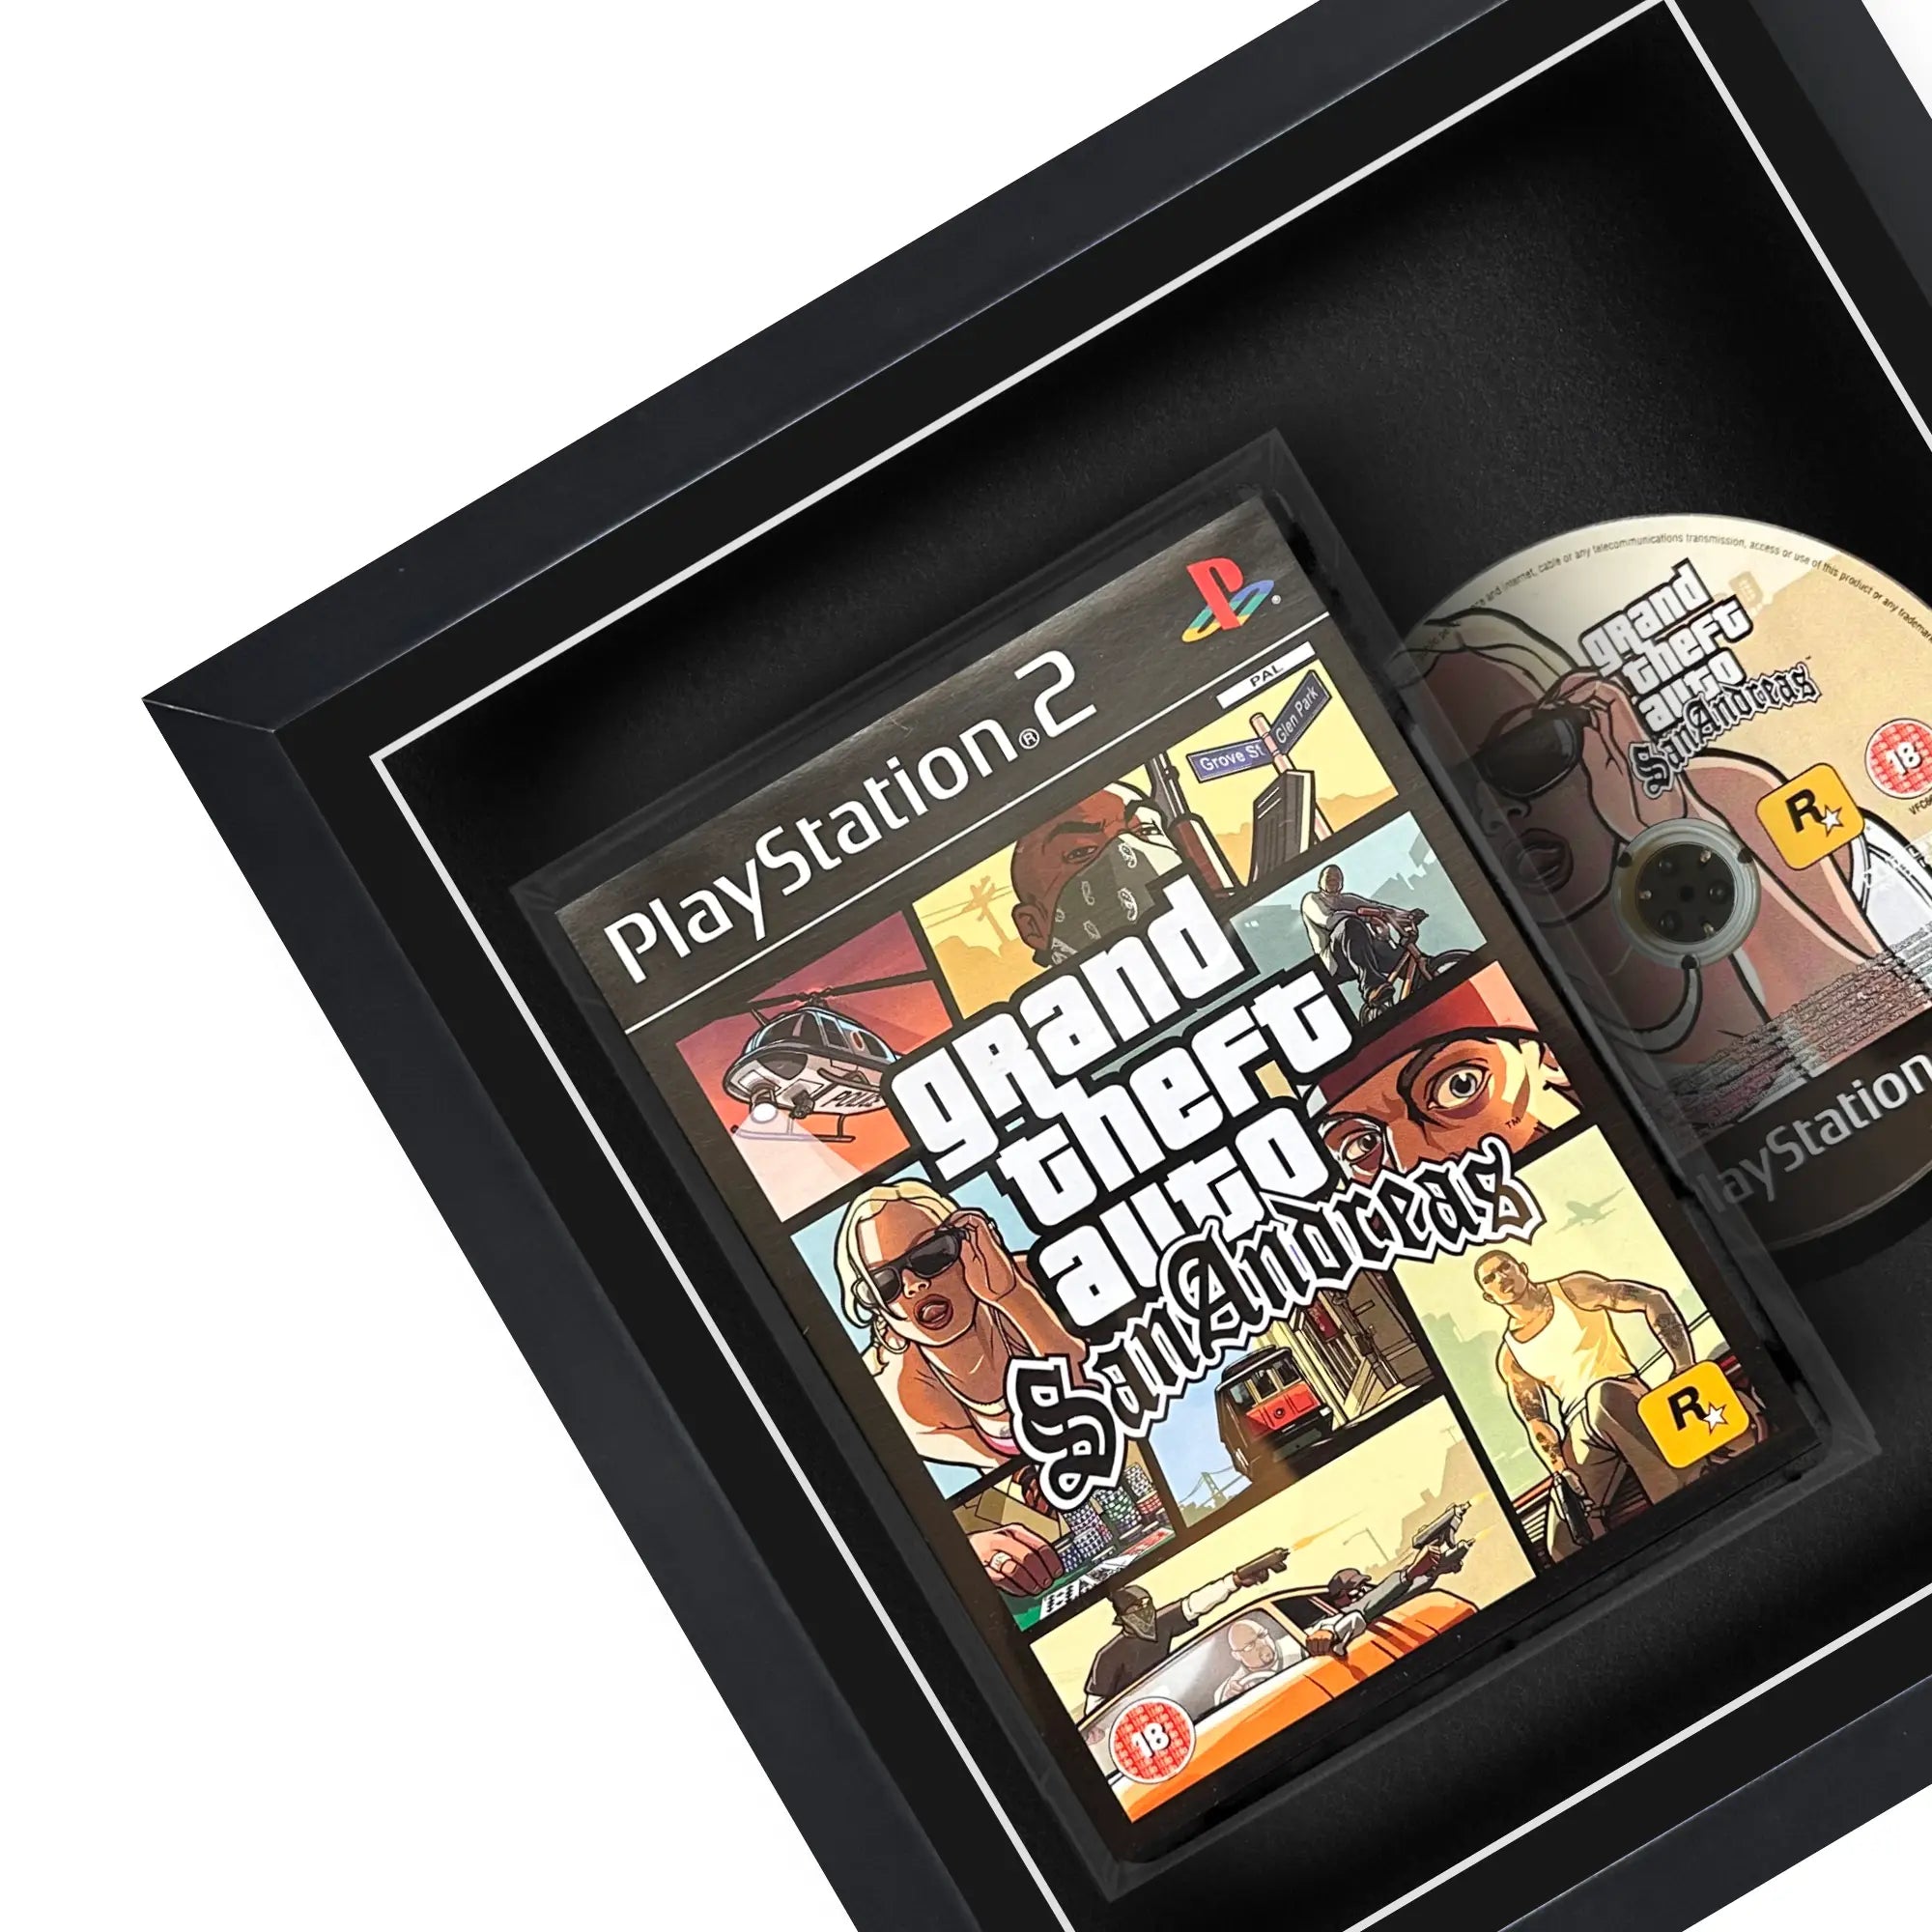 Frame your own PlayStation 2 game to be displayed within this square frame, the perfect way to showcase your game